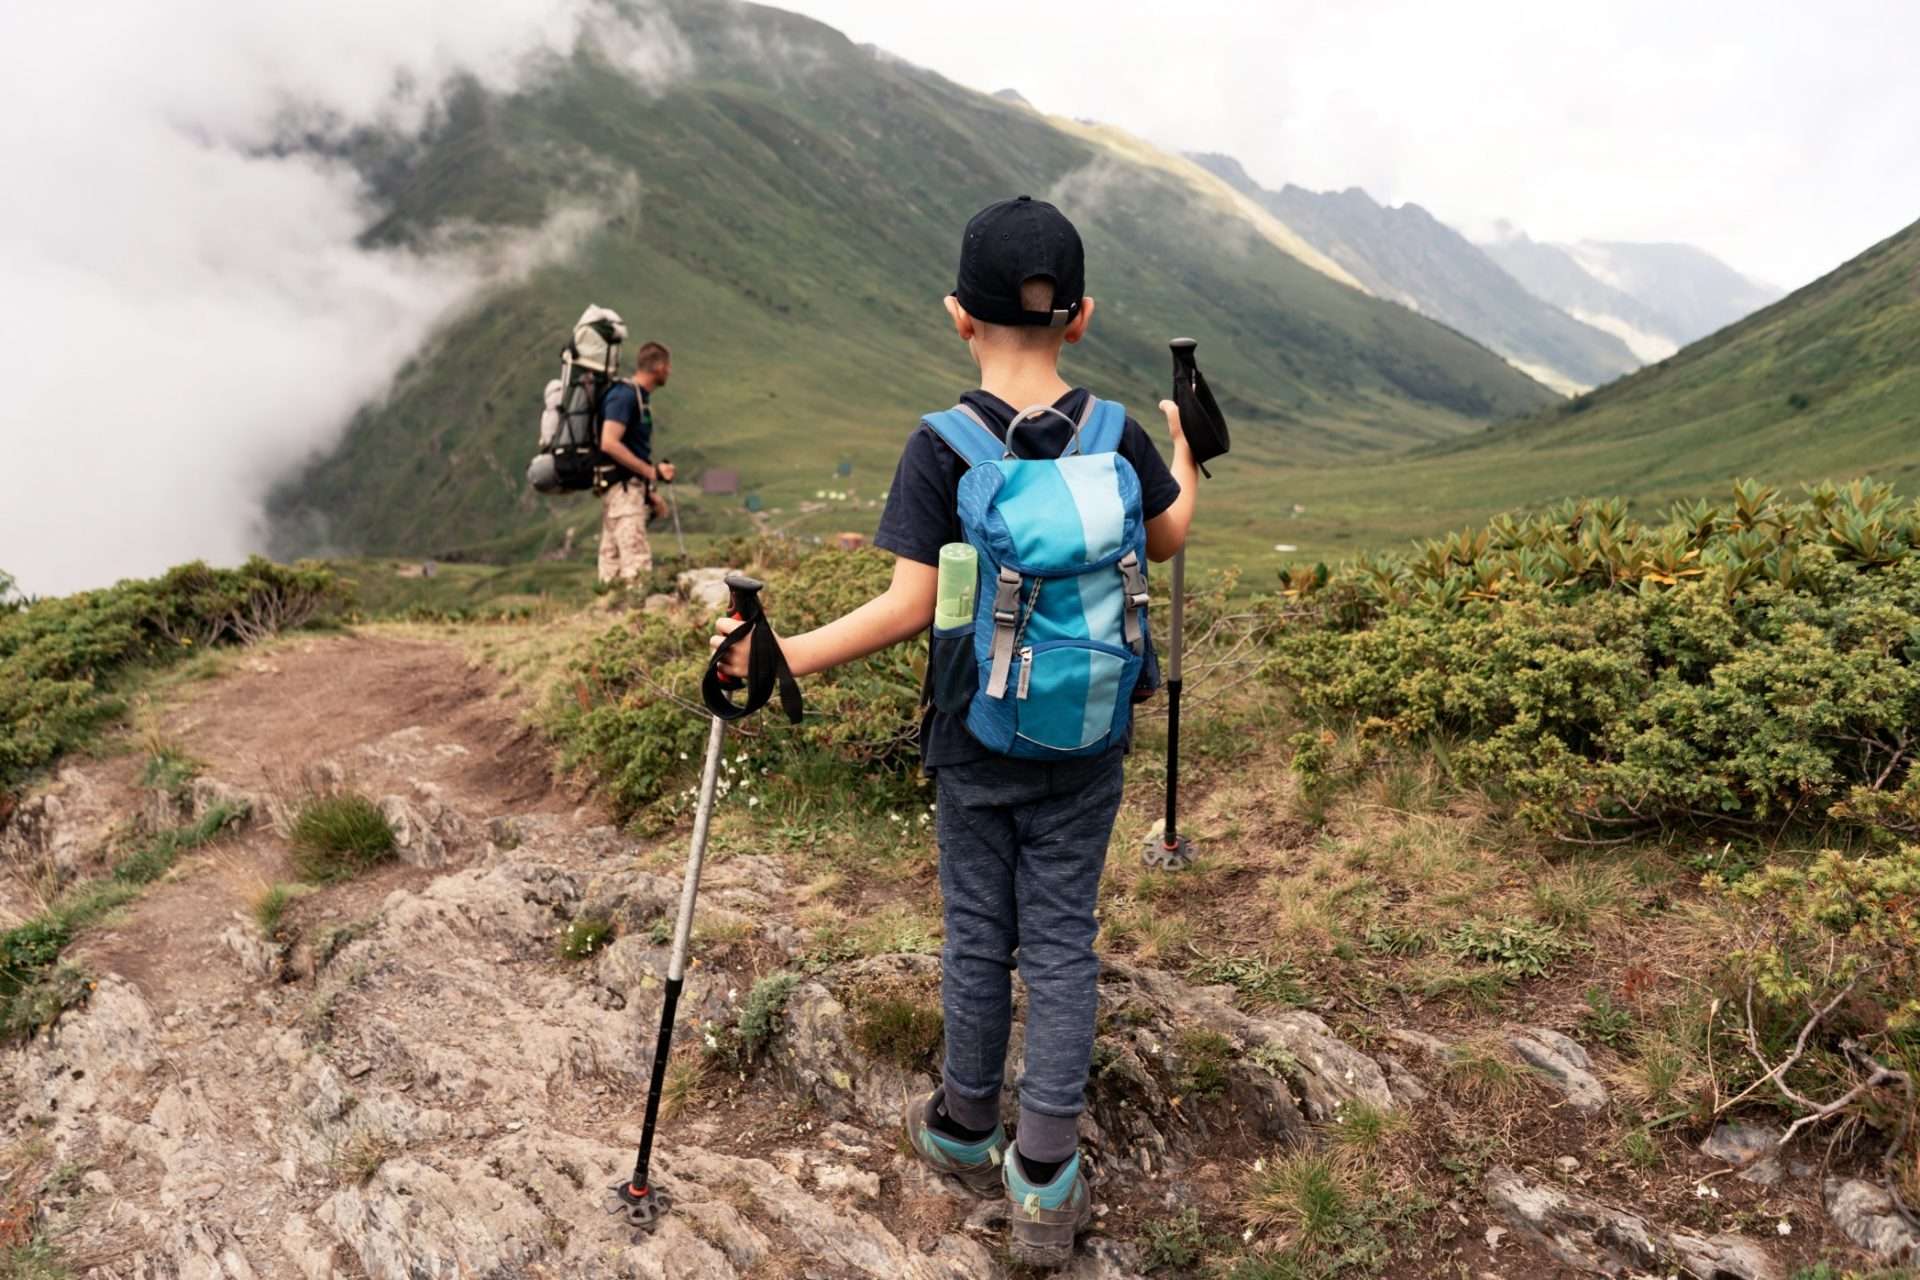 Father and son using hiking poles to hike through a mountain.